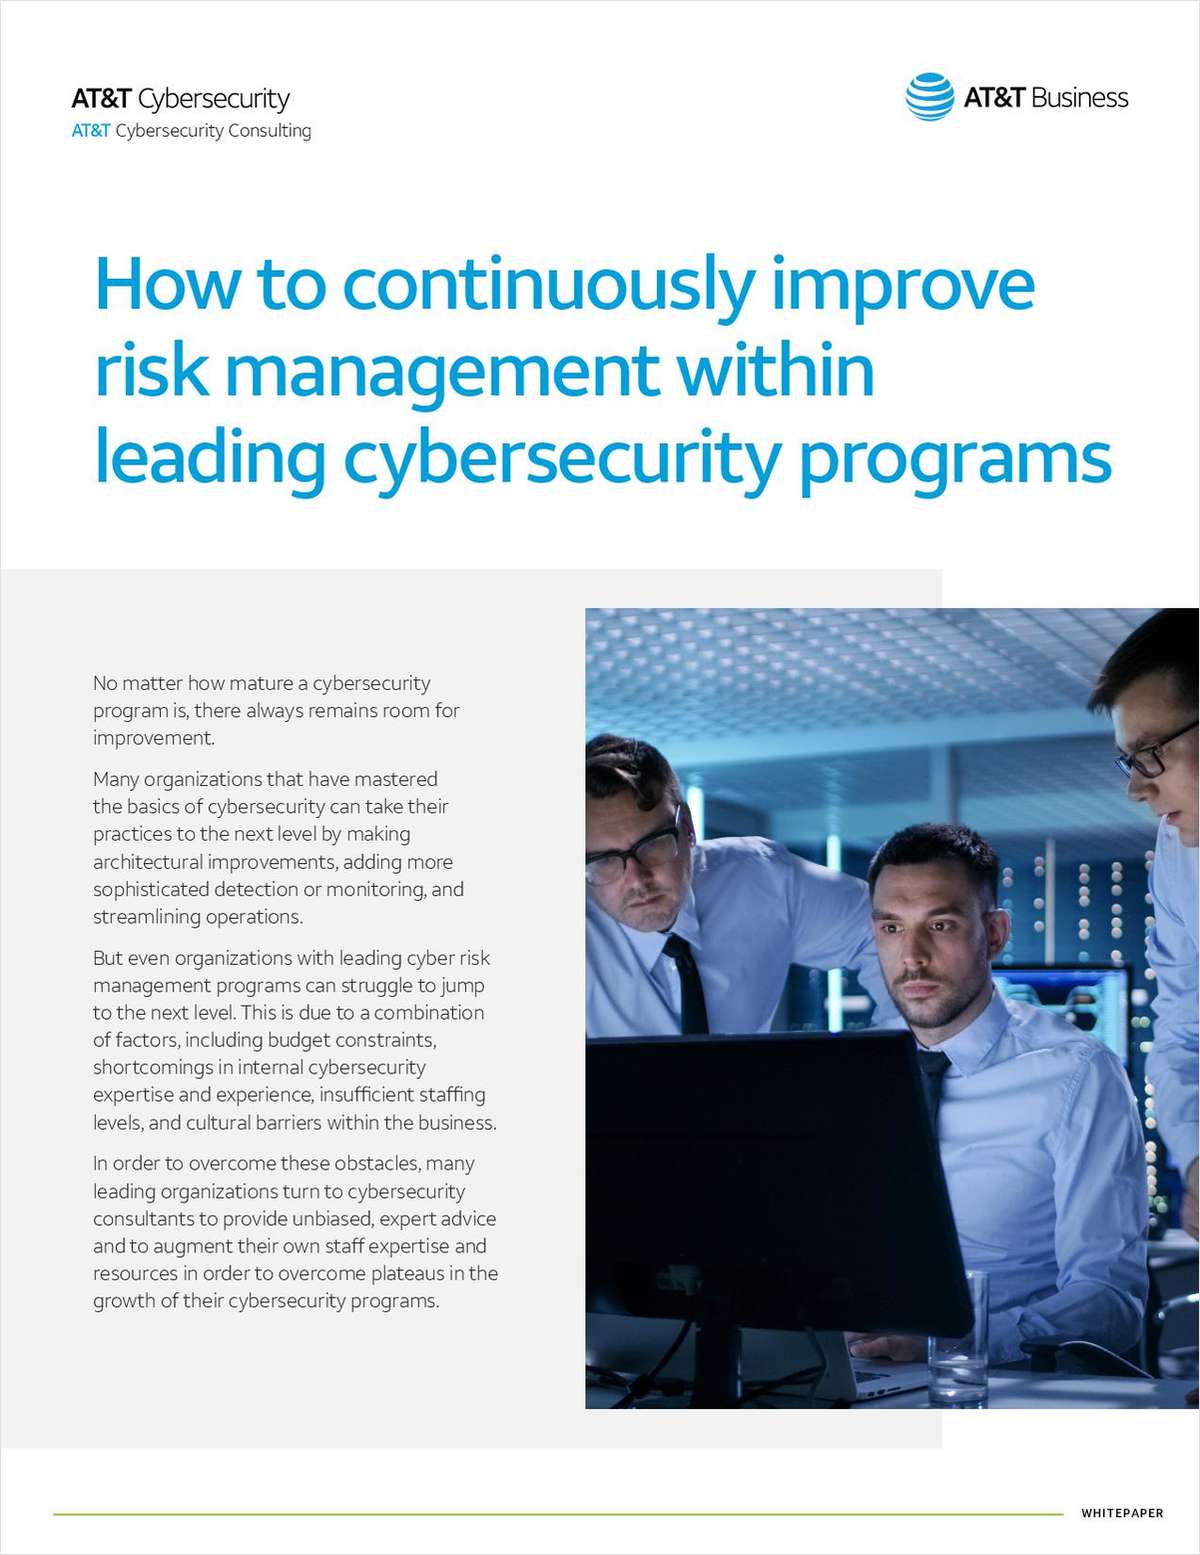 How to Continuously Improve Risk Management Leading Cybersecurity Programs​